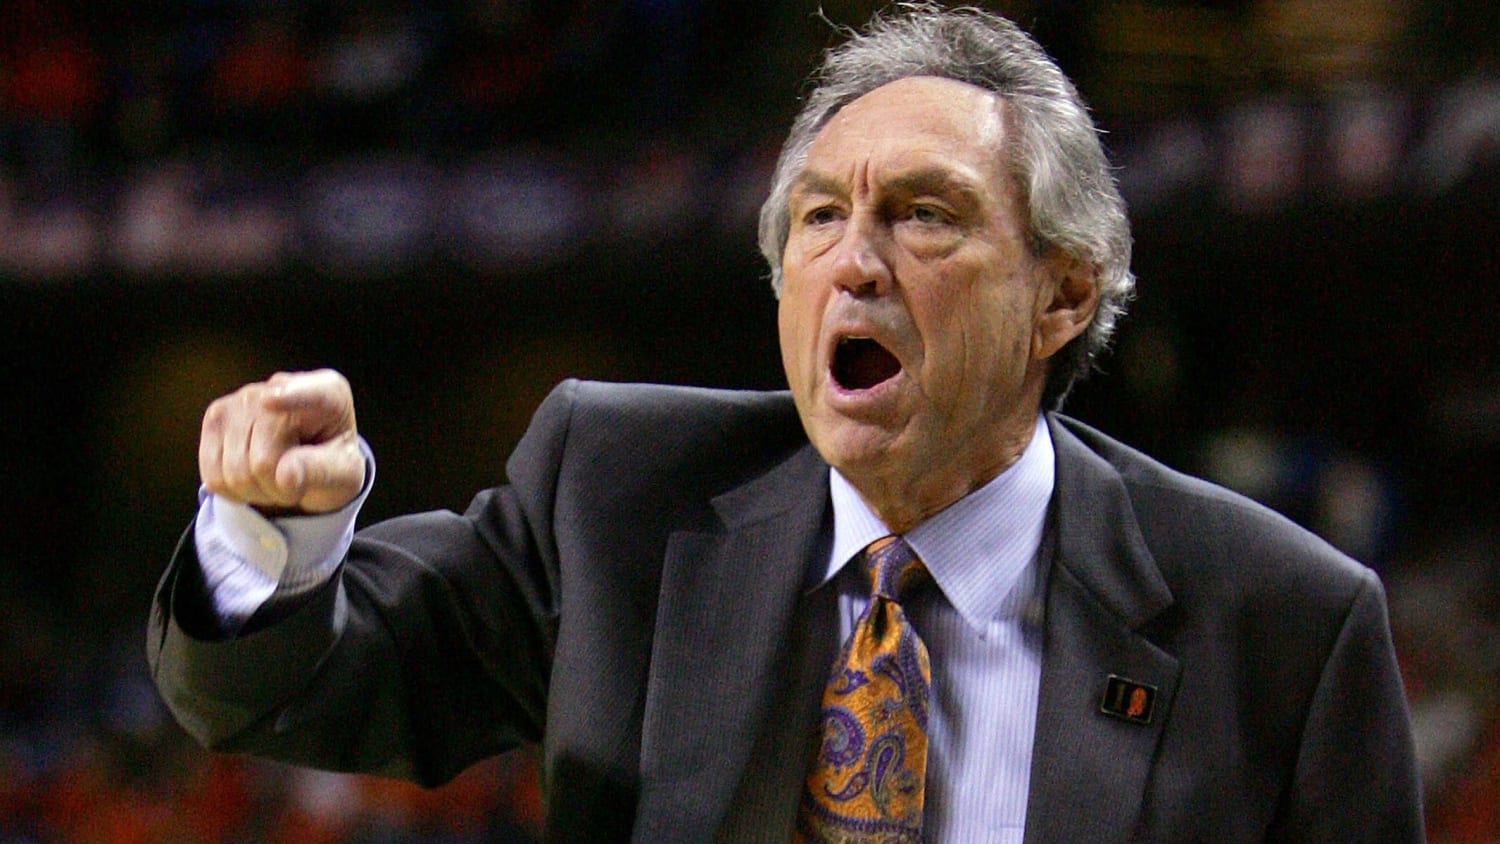 Longtime basketball coach Eddie Sutton, who died at 84, 'changed a lot of lives'